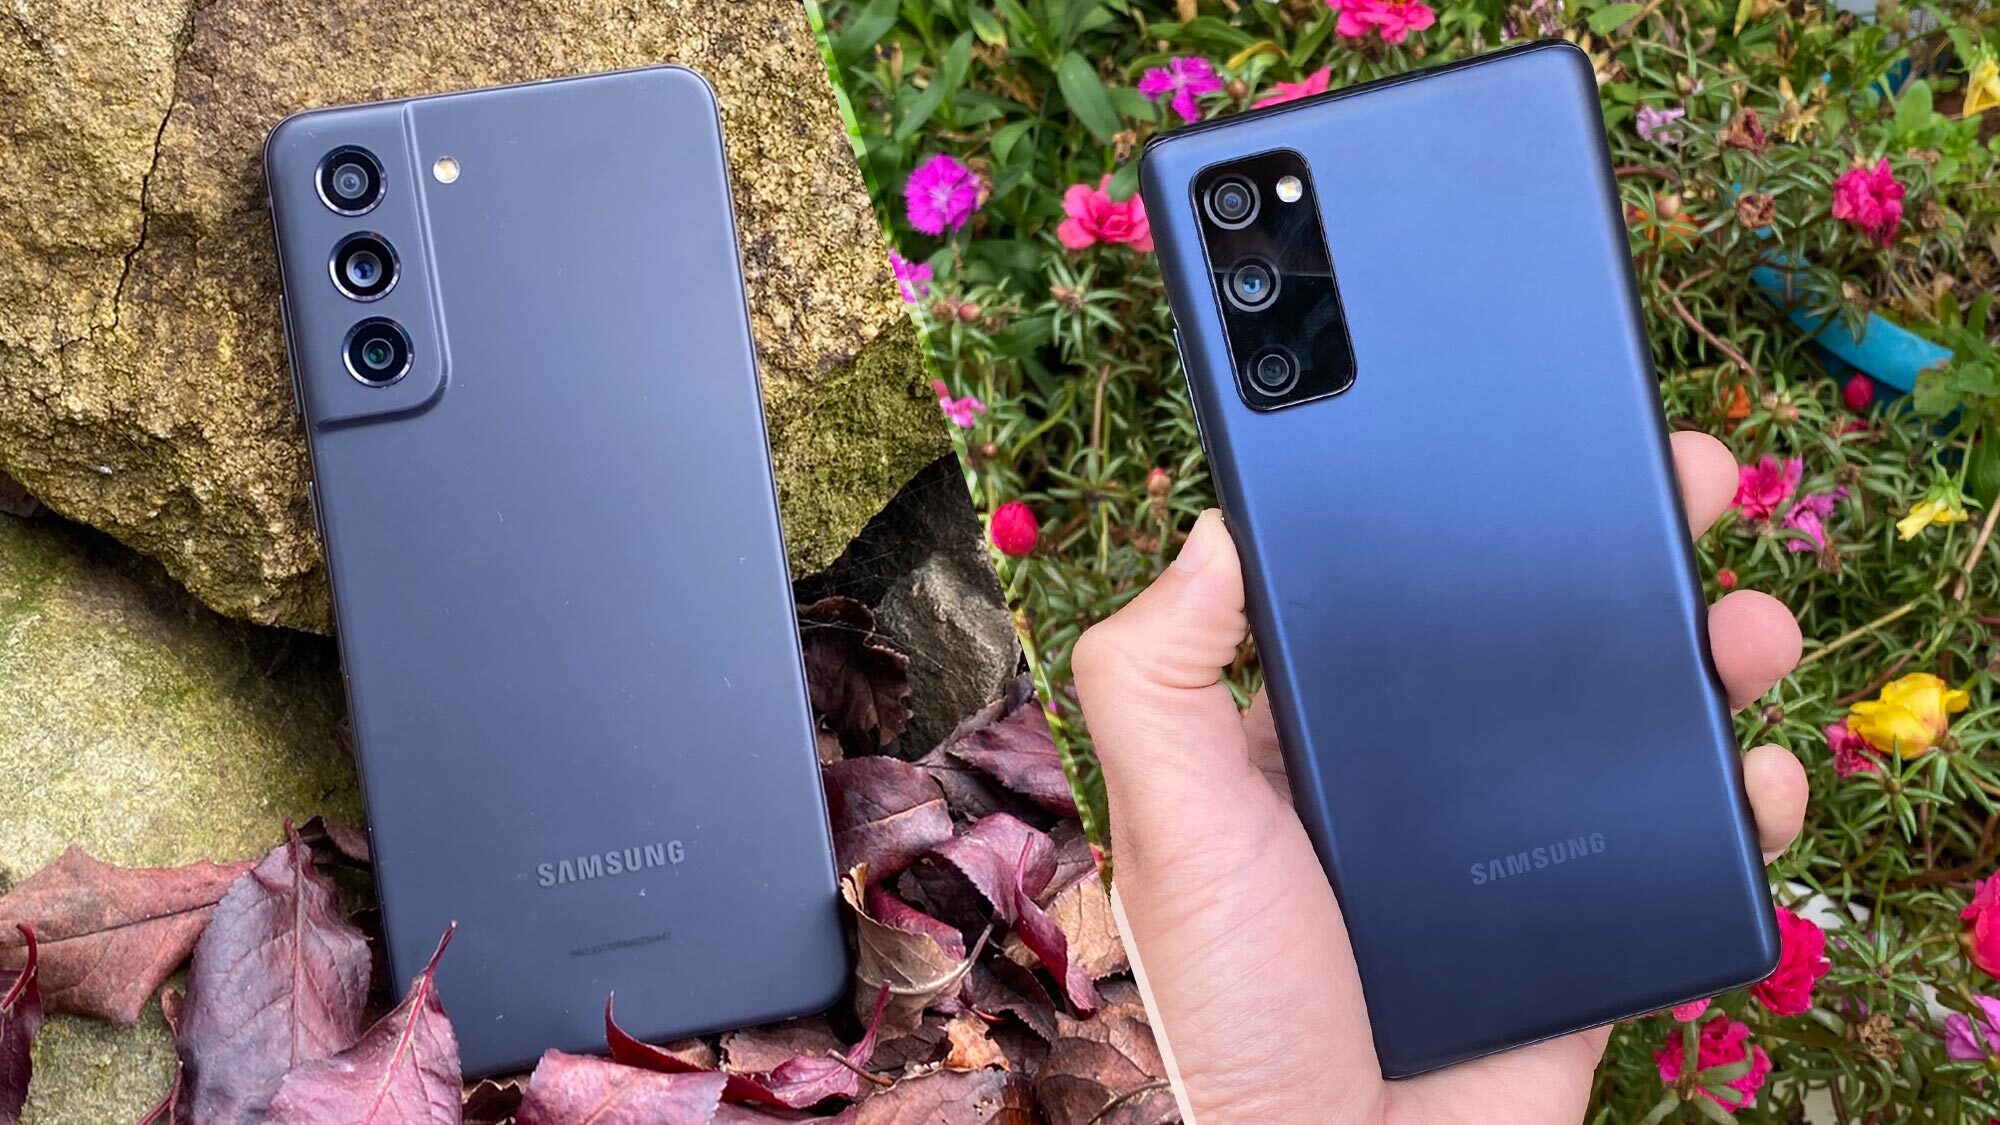 Galaxy S20 FE 5G Review: Samsung Brings Big Android Value